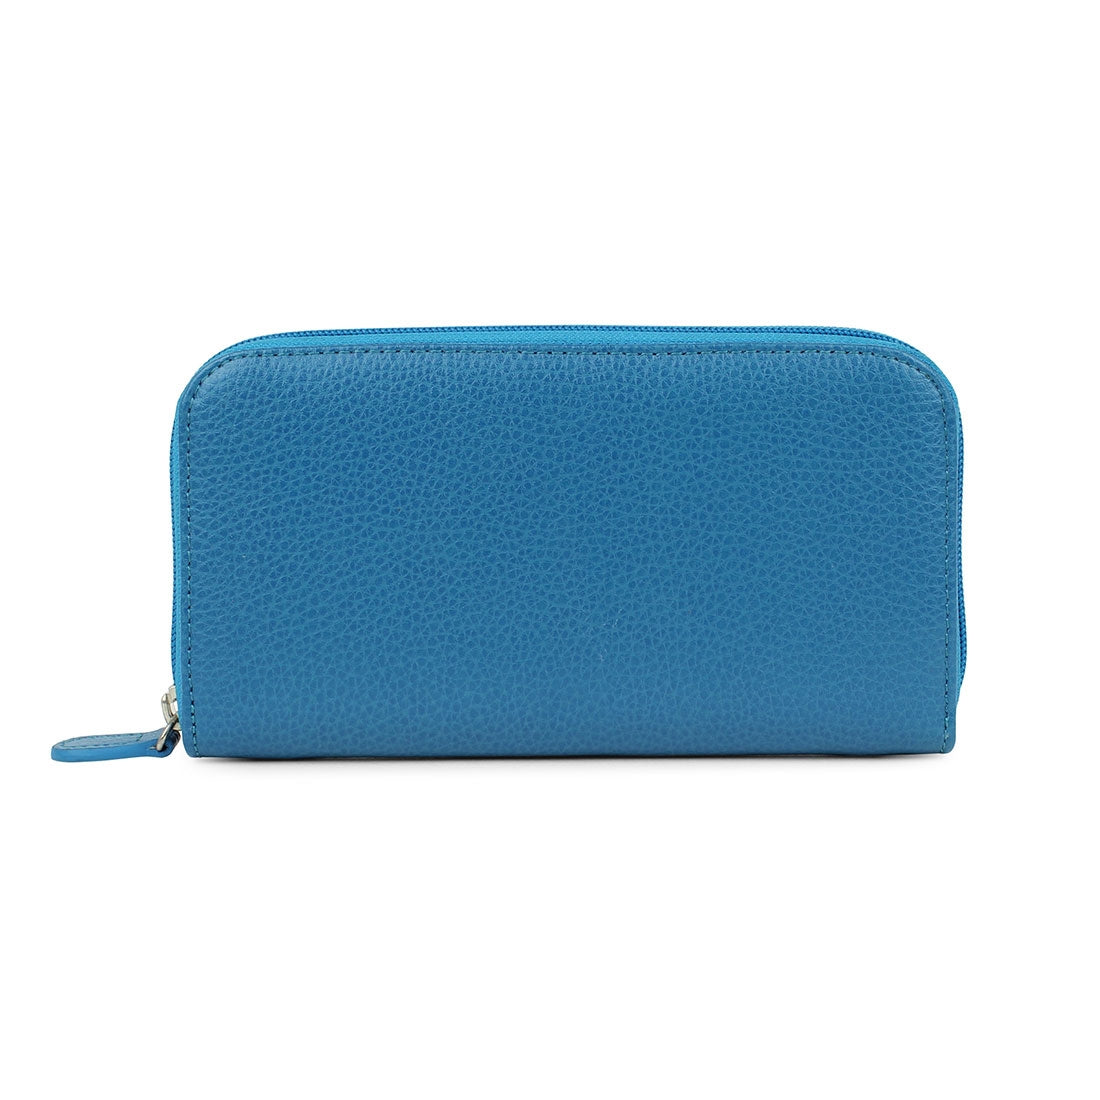 Wallet / Clutch - Turquoise#color_laurige-turquoise